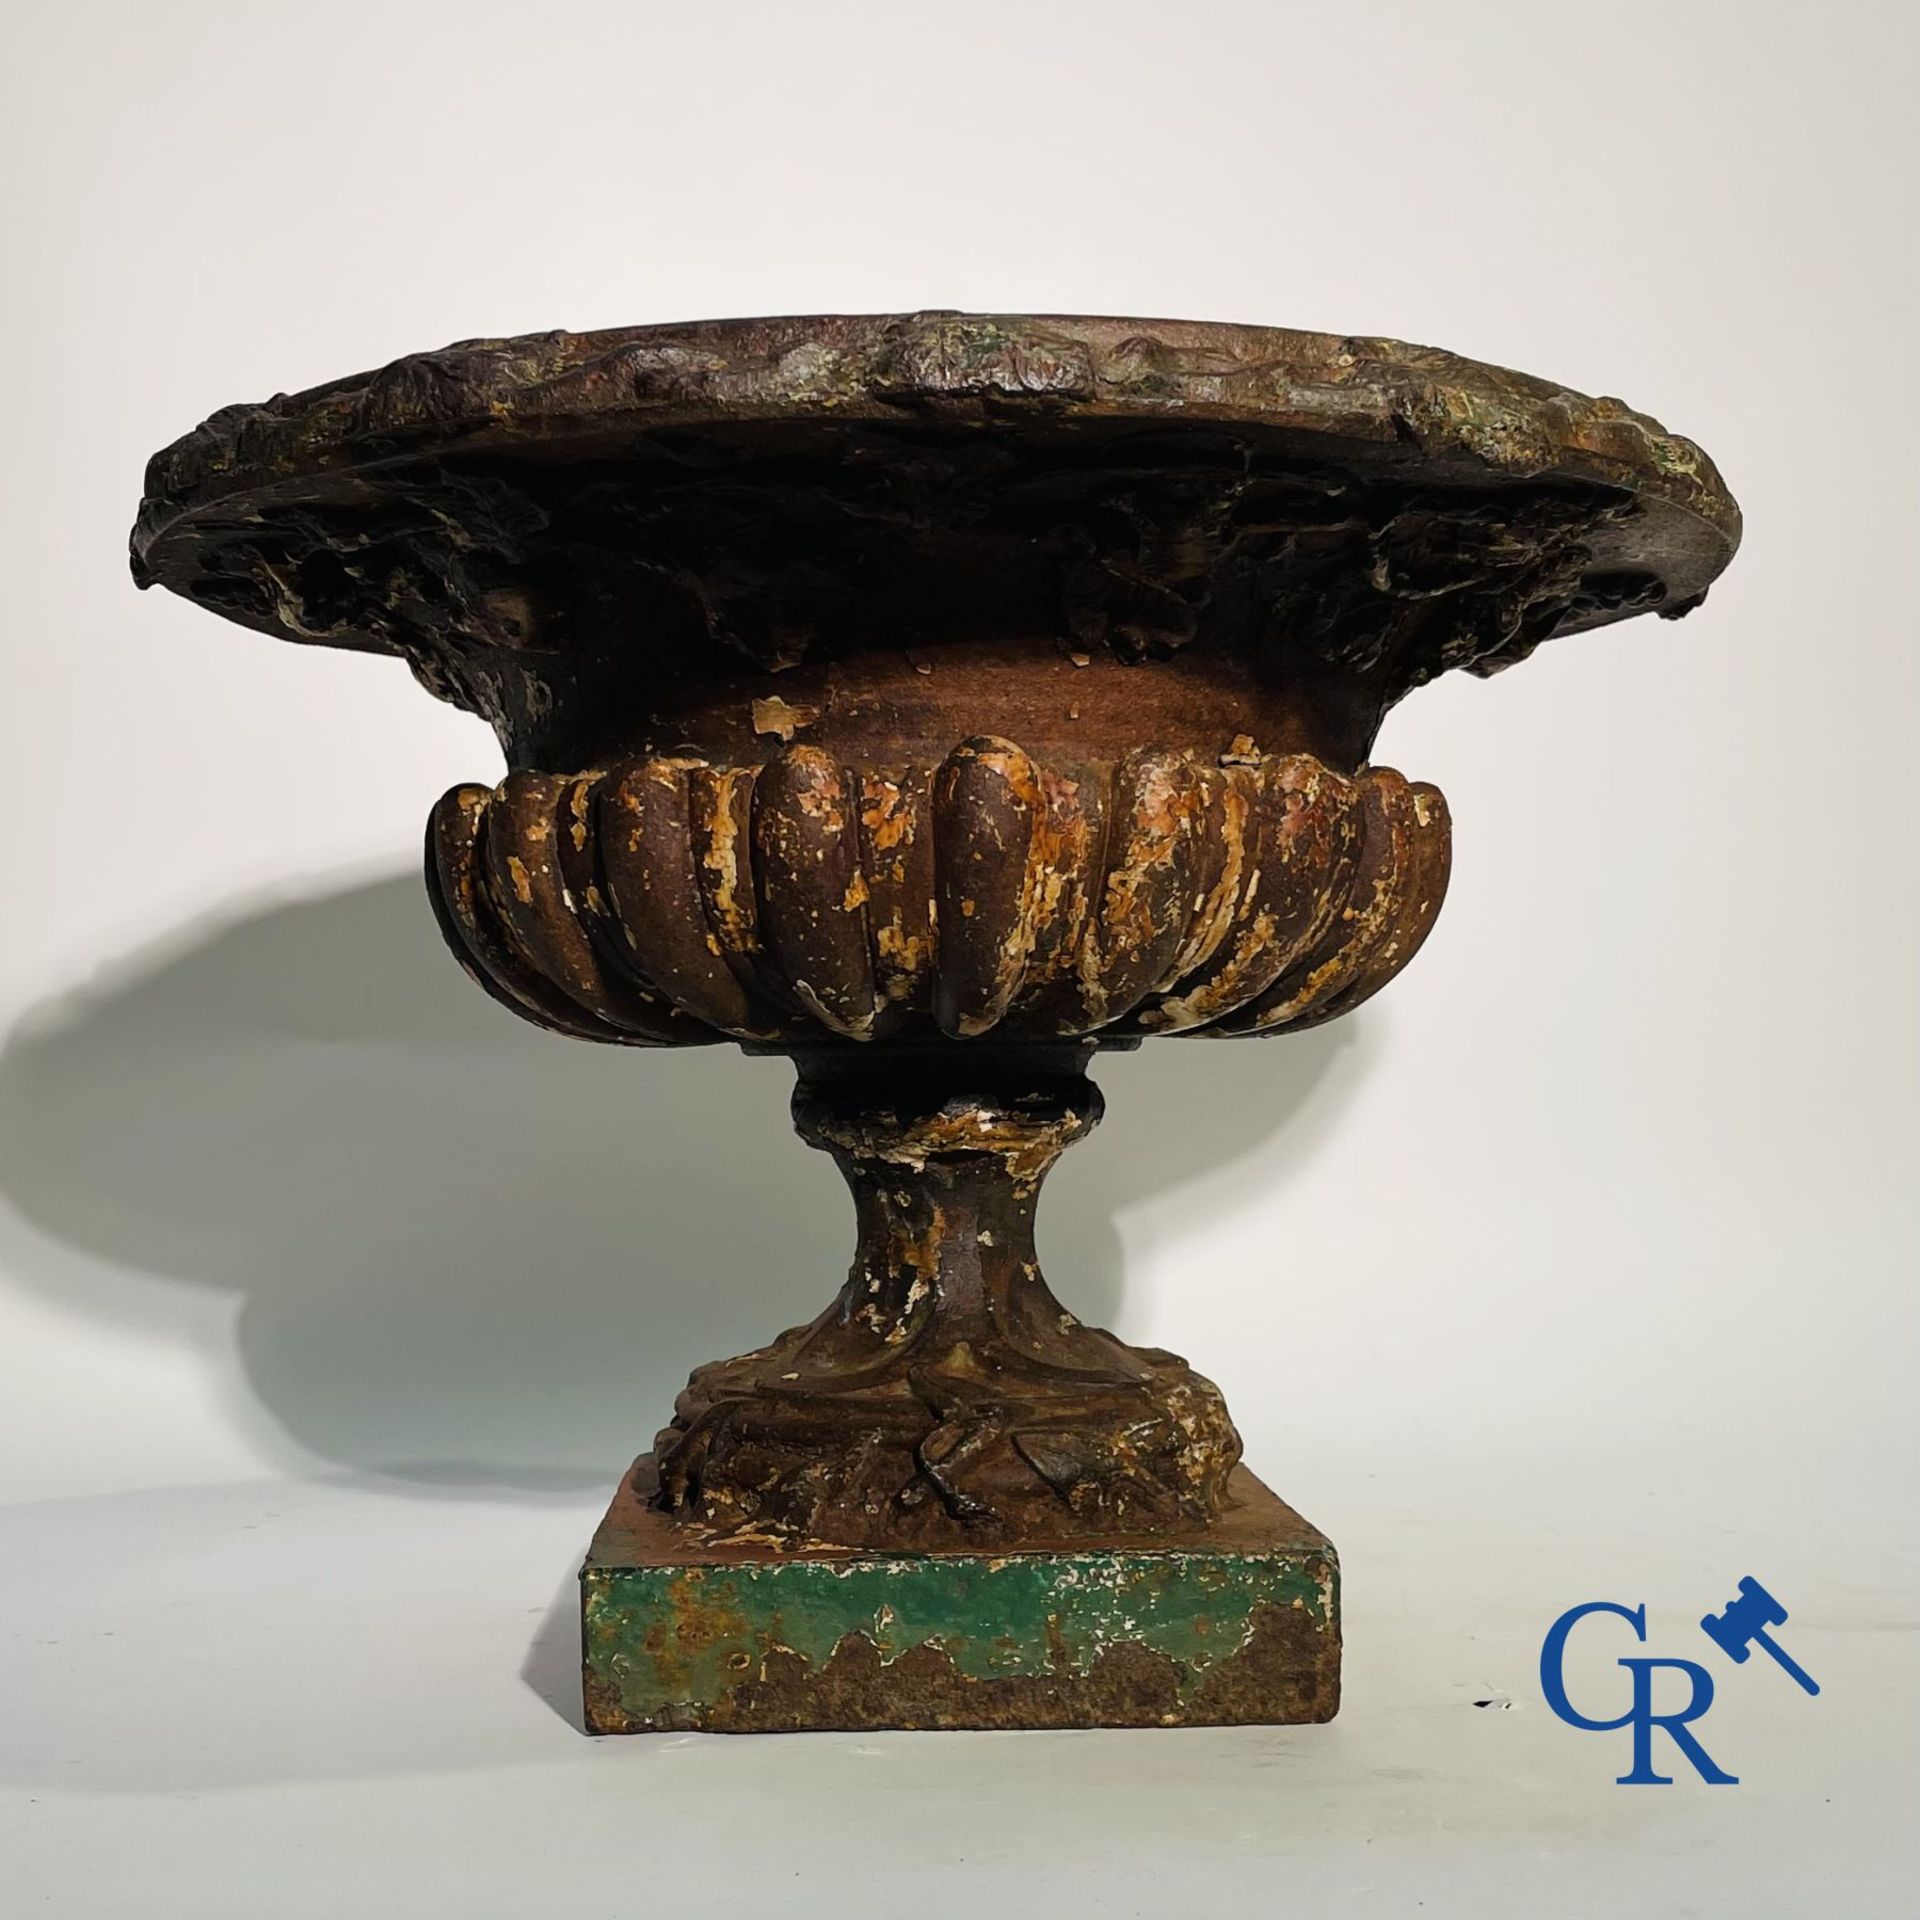 A 19th century cast iron garden vase decorated with grapevines. - Image 2 of 7